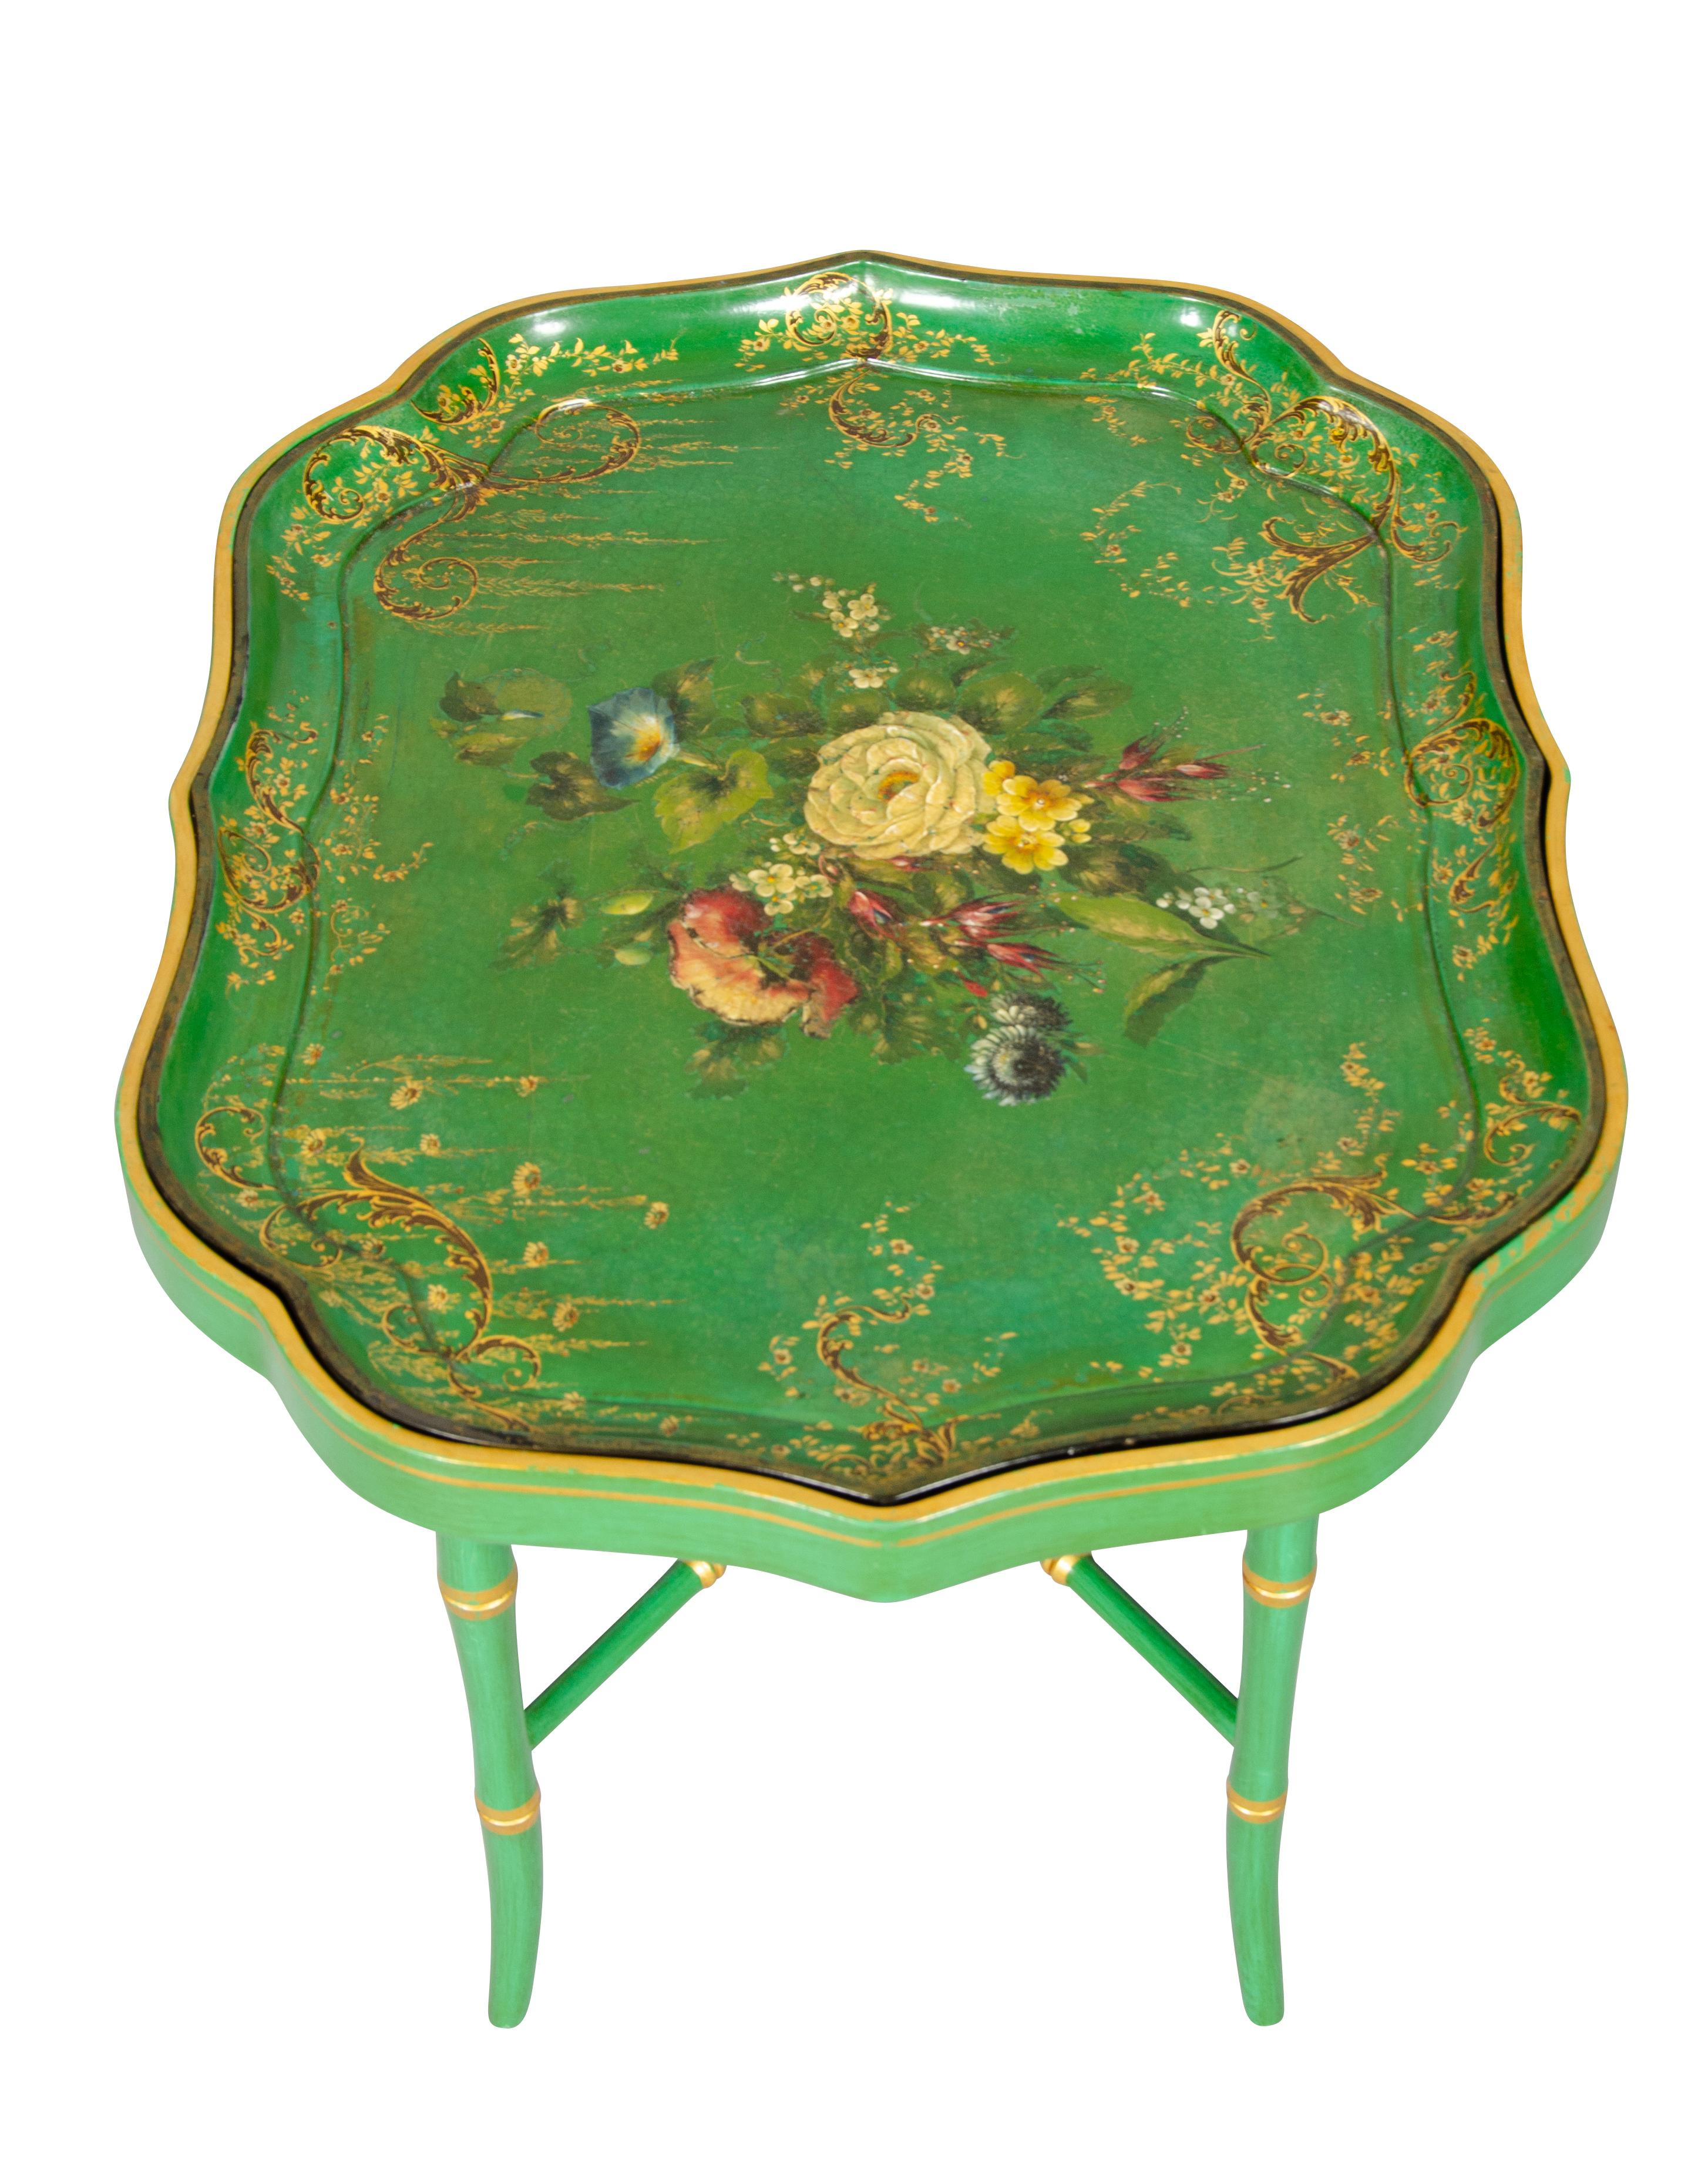 Victorian Apple Green Papier Mache Tray Table by Jennens & Bettridge's In Good Condition For Sale In Essex, MA